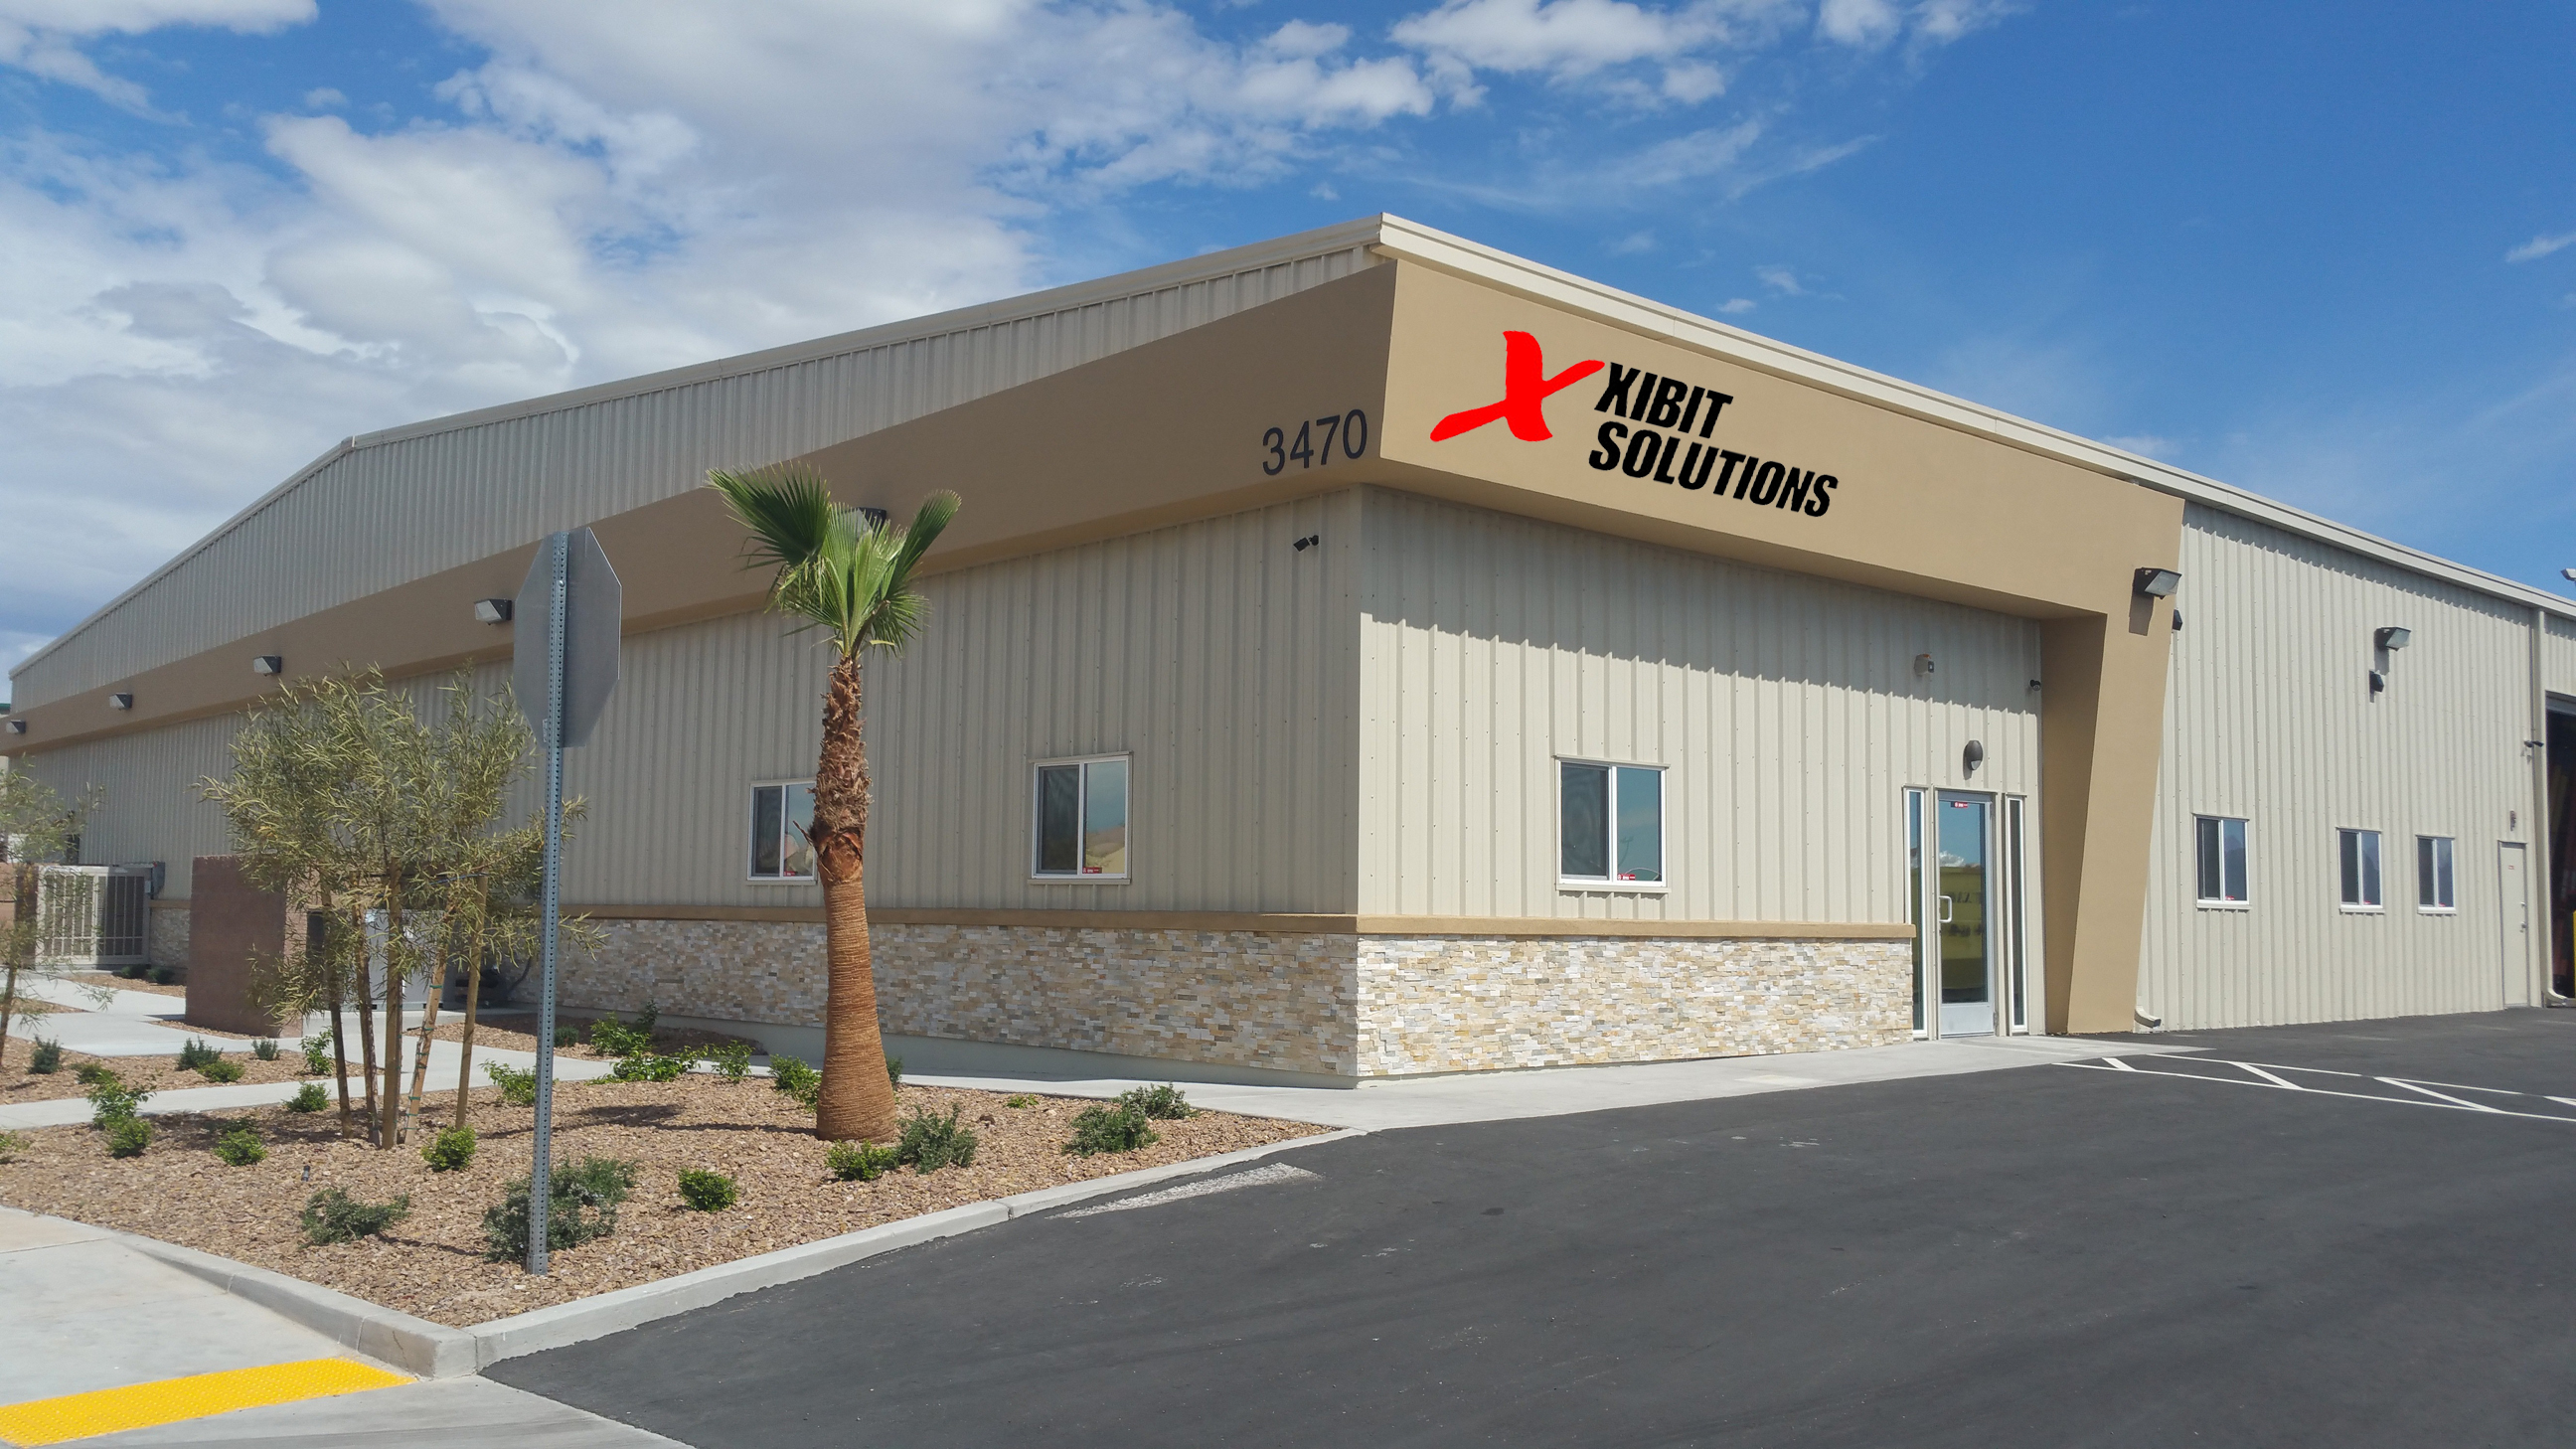 Xibit Solutions' New 27,00 Sq Ft Fabrication Facility in Las Vegas